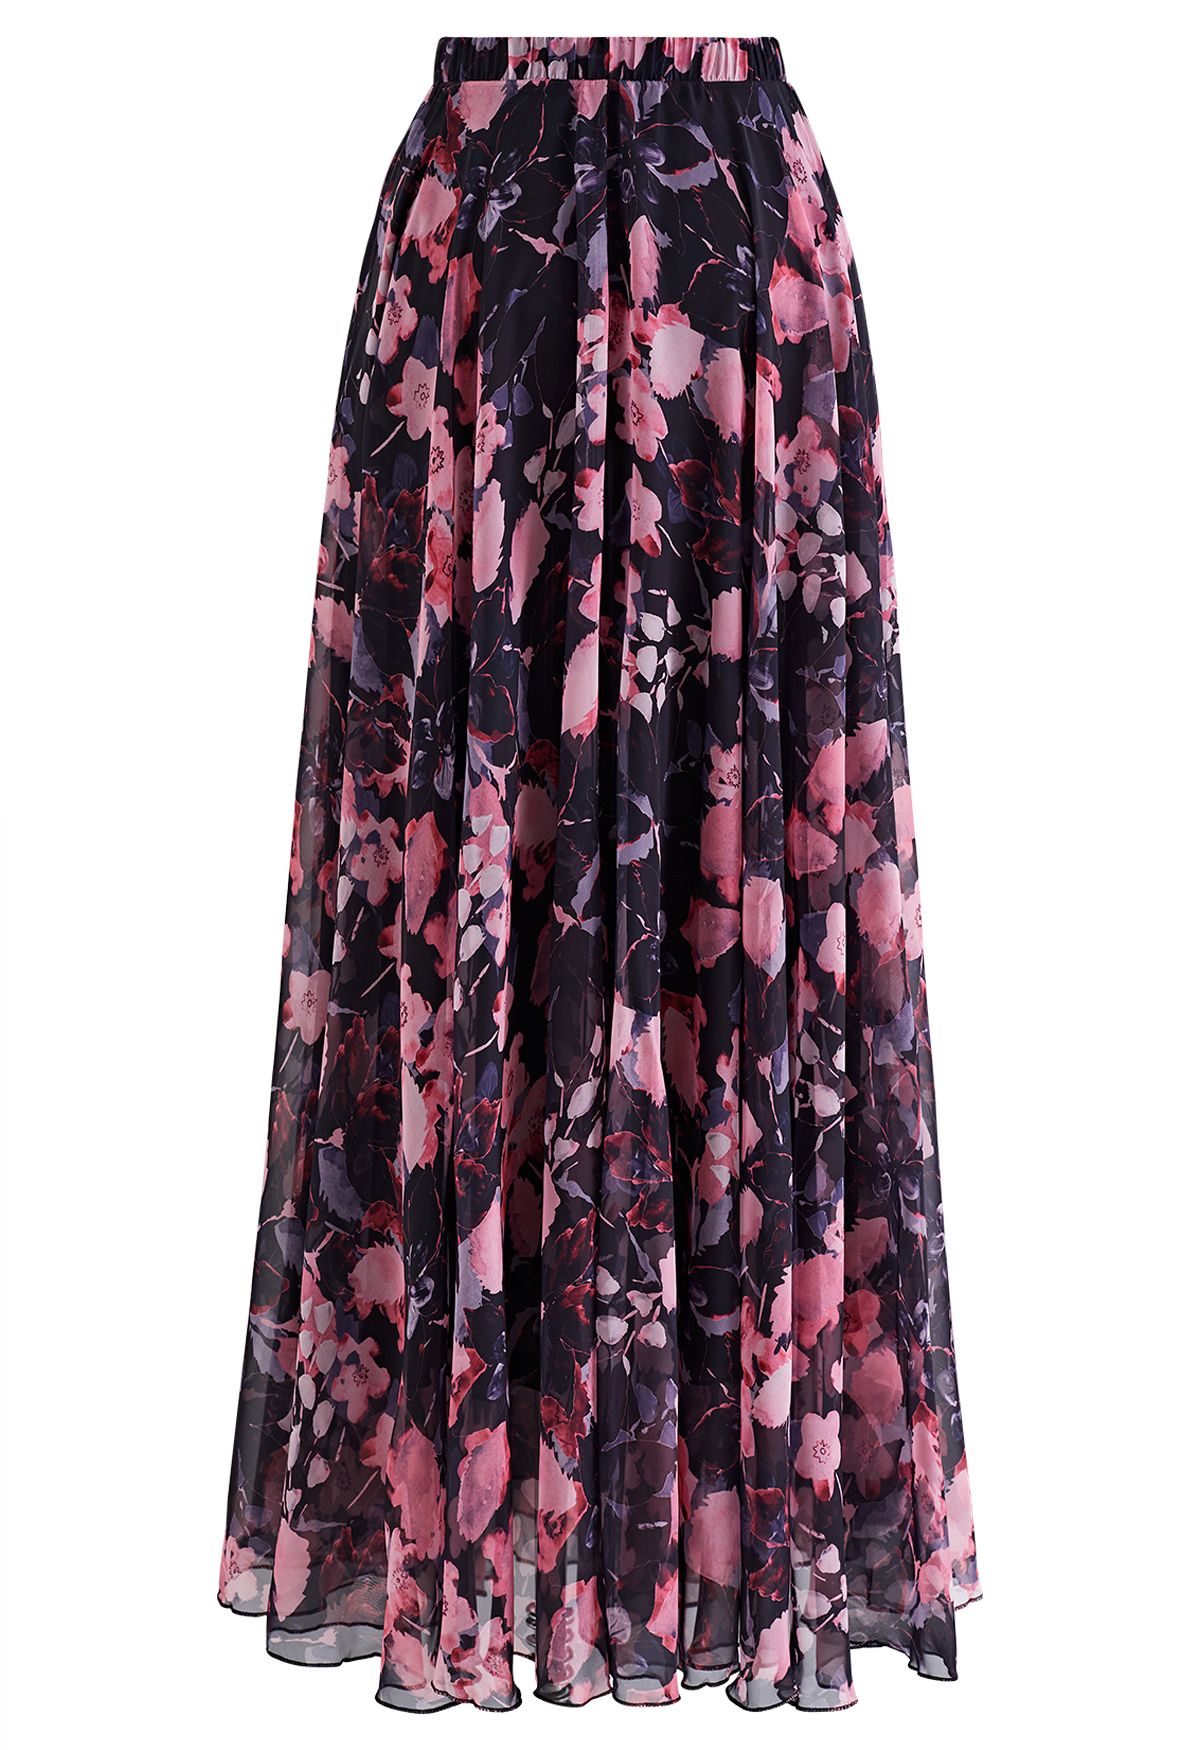 Gorgeous Pink Floral Watercolor Chiffon Maxi Skirt - Retro, Indie and ...